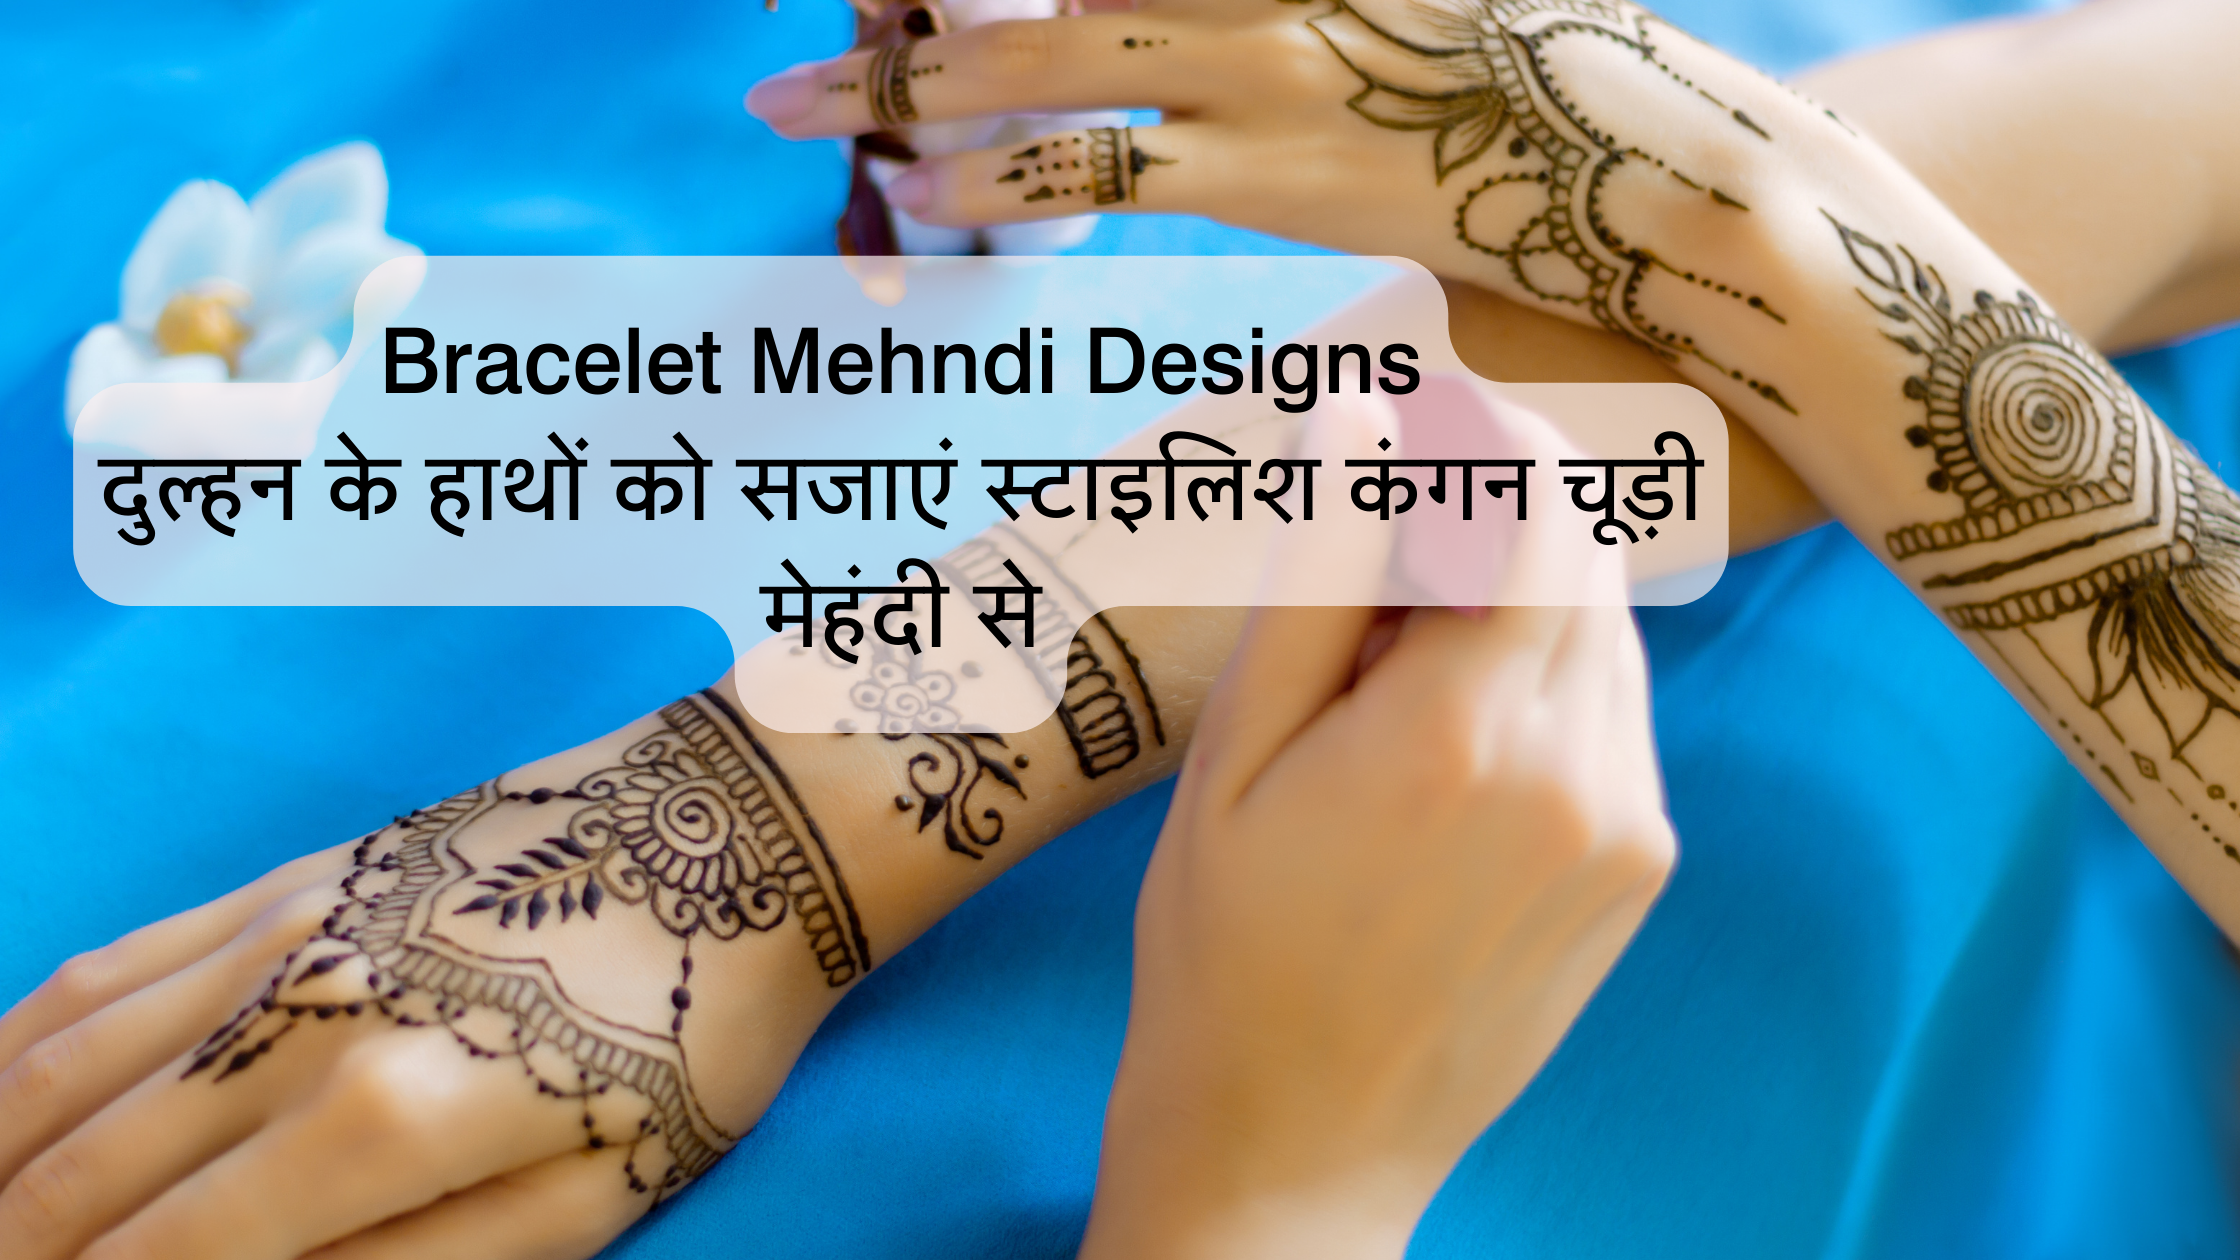 Simple Jewellery Inspired Mehndi Designs For Hand - K4 Fashion